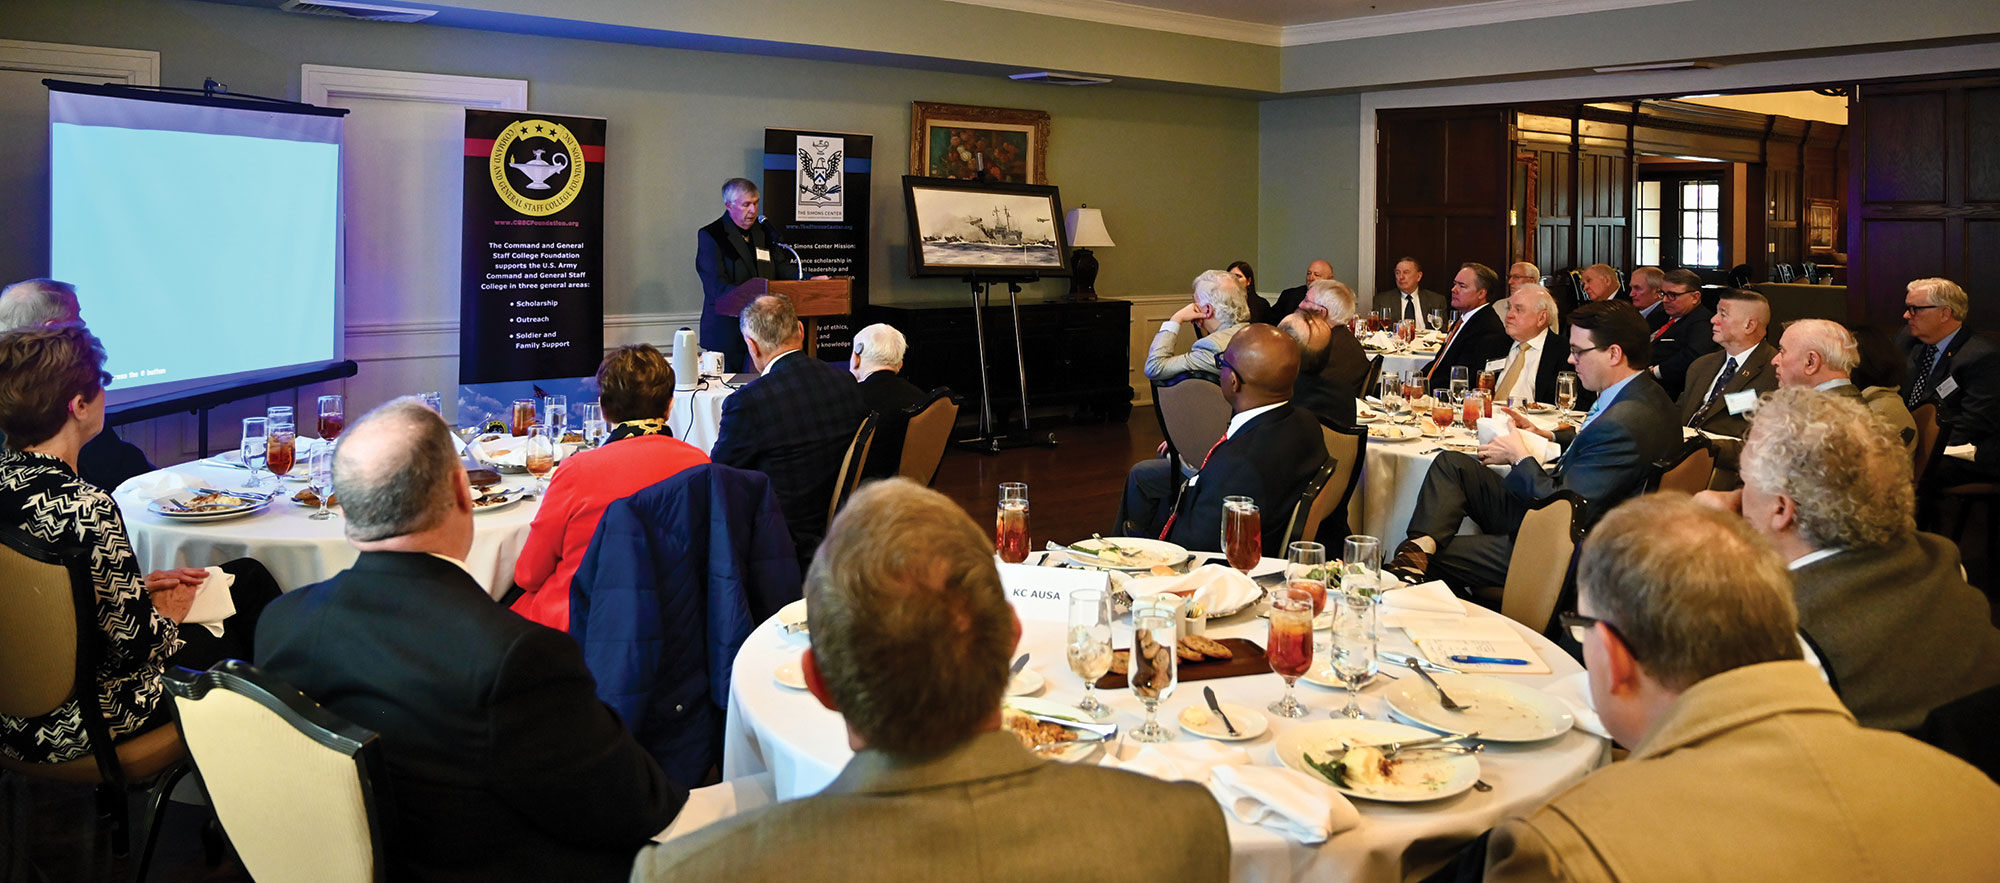 Former crew member of the USS Pueblo Steven Woelk tells the story of his ship's capture and the crew's brutal treatment of the crew by the North Koreans during the Arter-Rowland National Security Forum luncheon event on Jan. 19, 2023, at the Carriage Club in Kansas City.